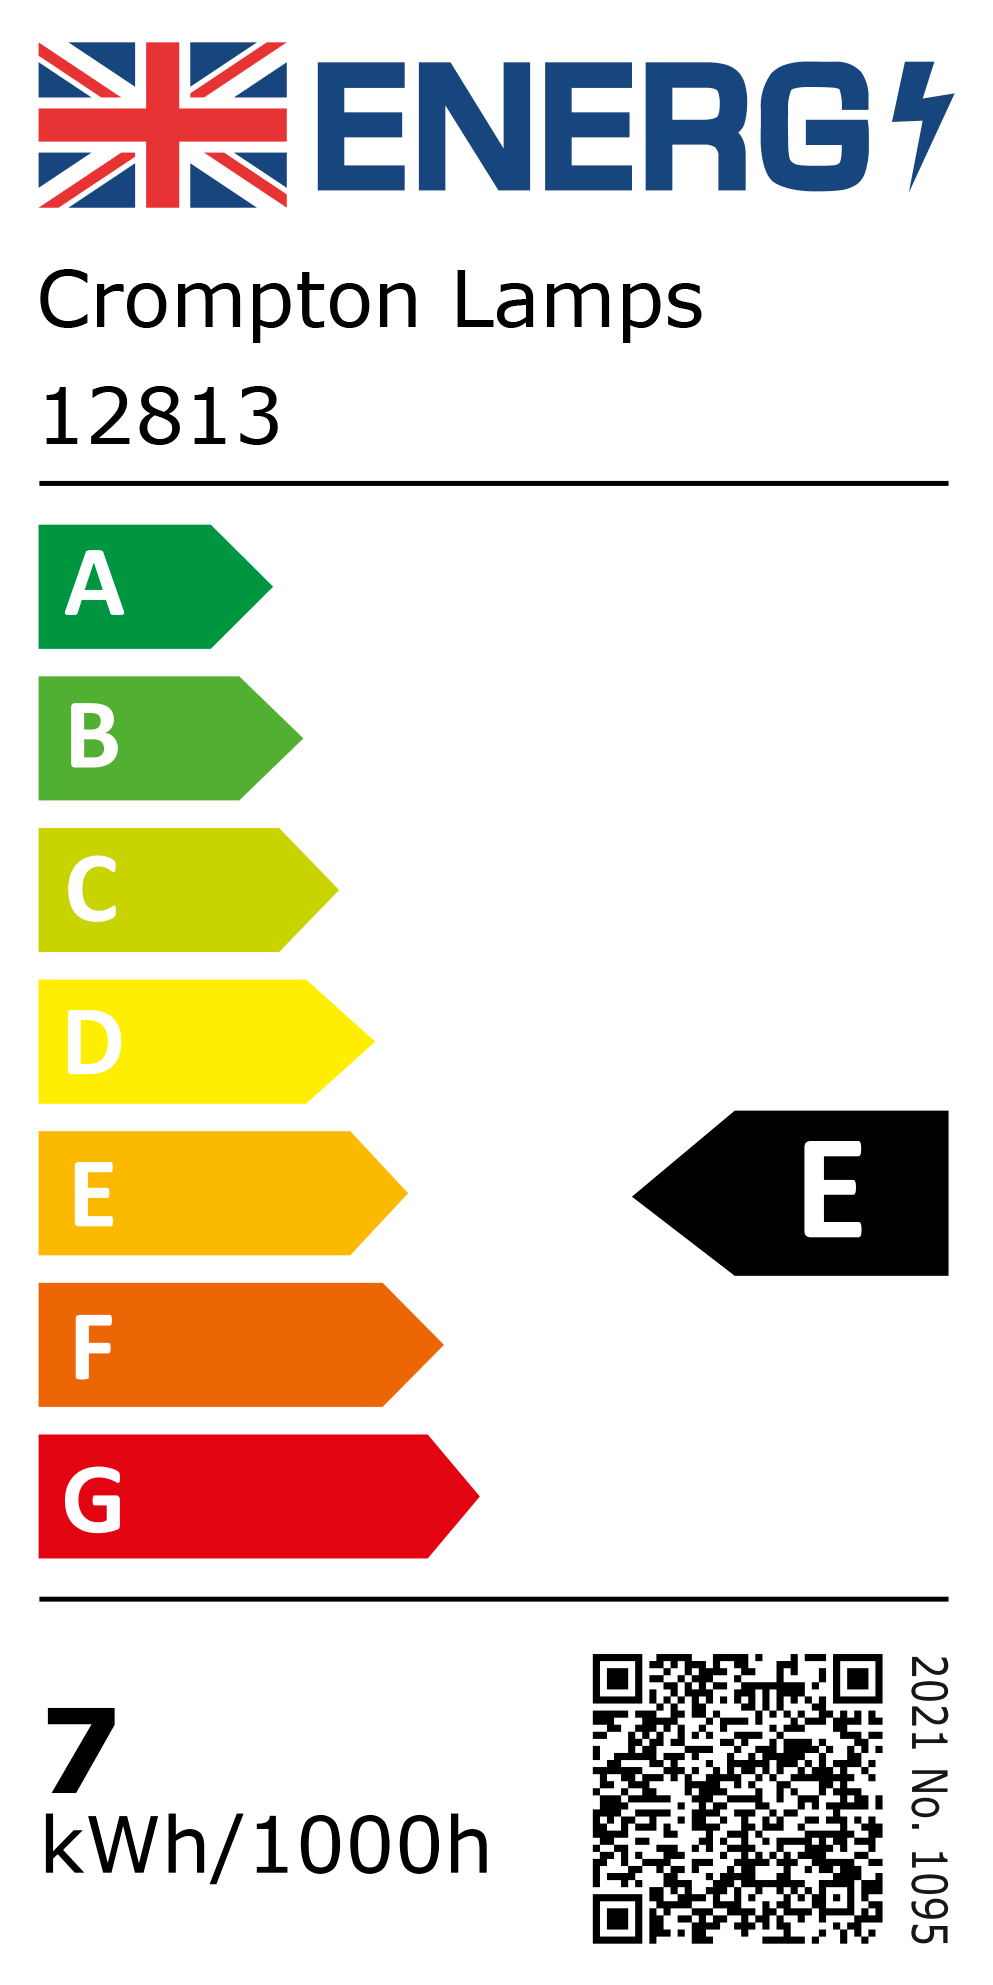 New 2021 Energy Rating Label: Stock Code 12813